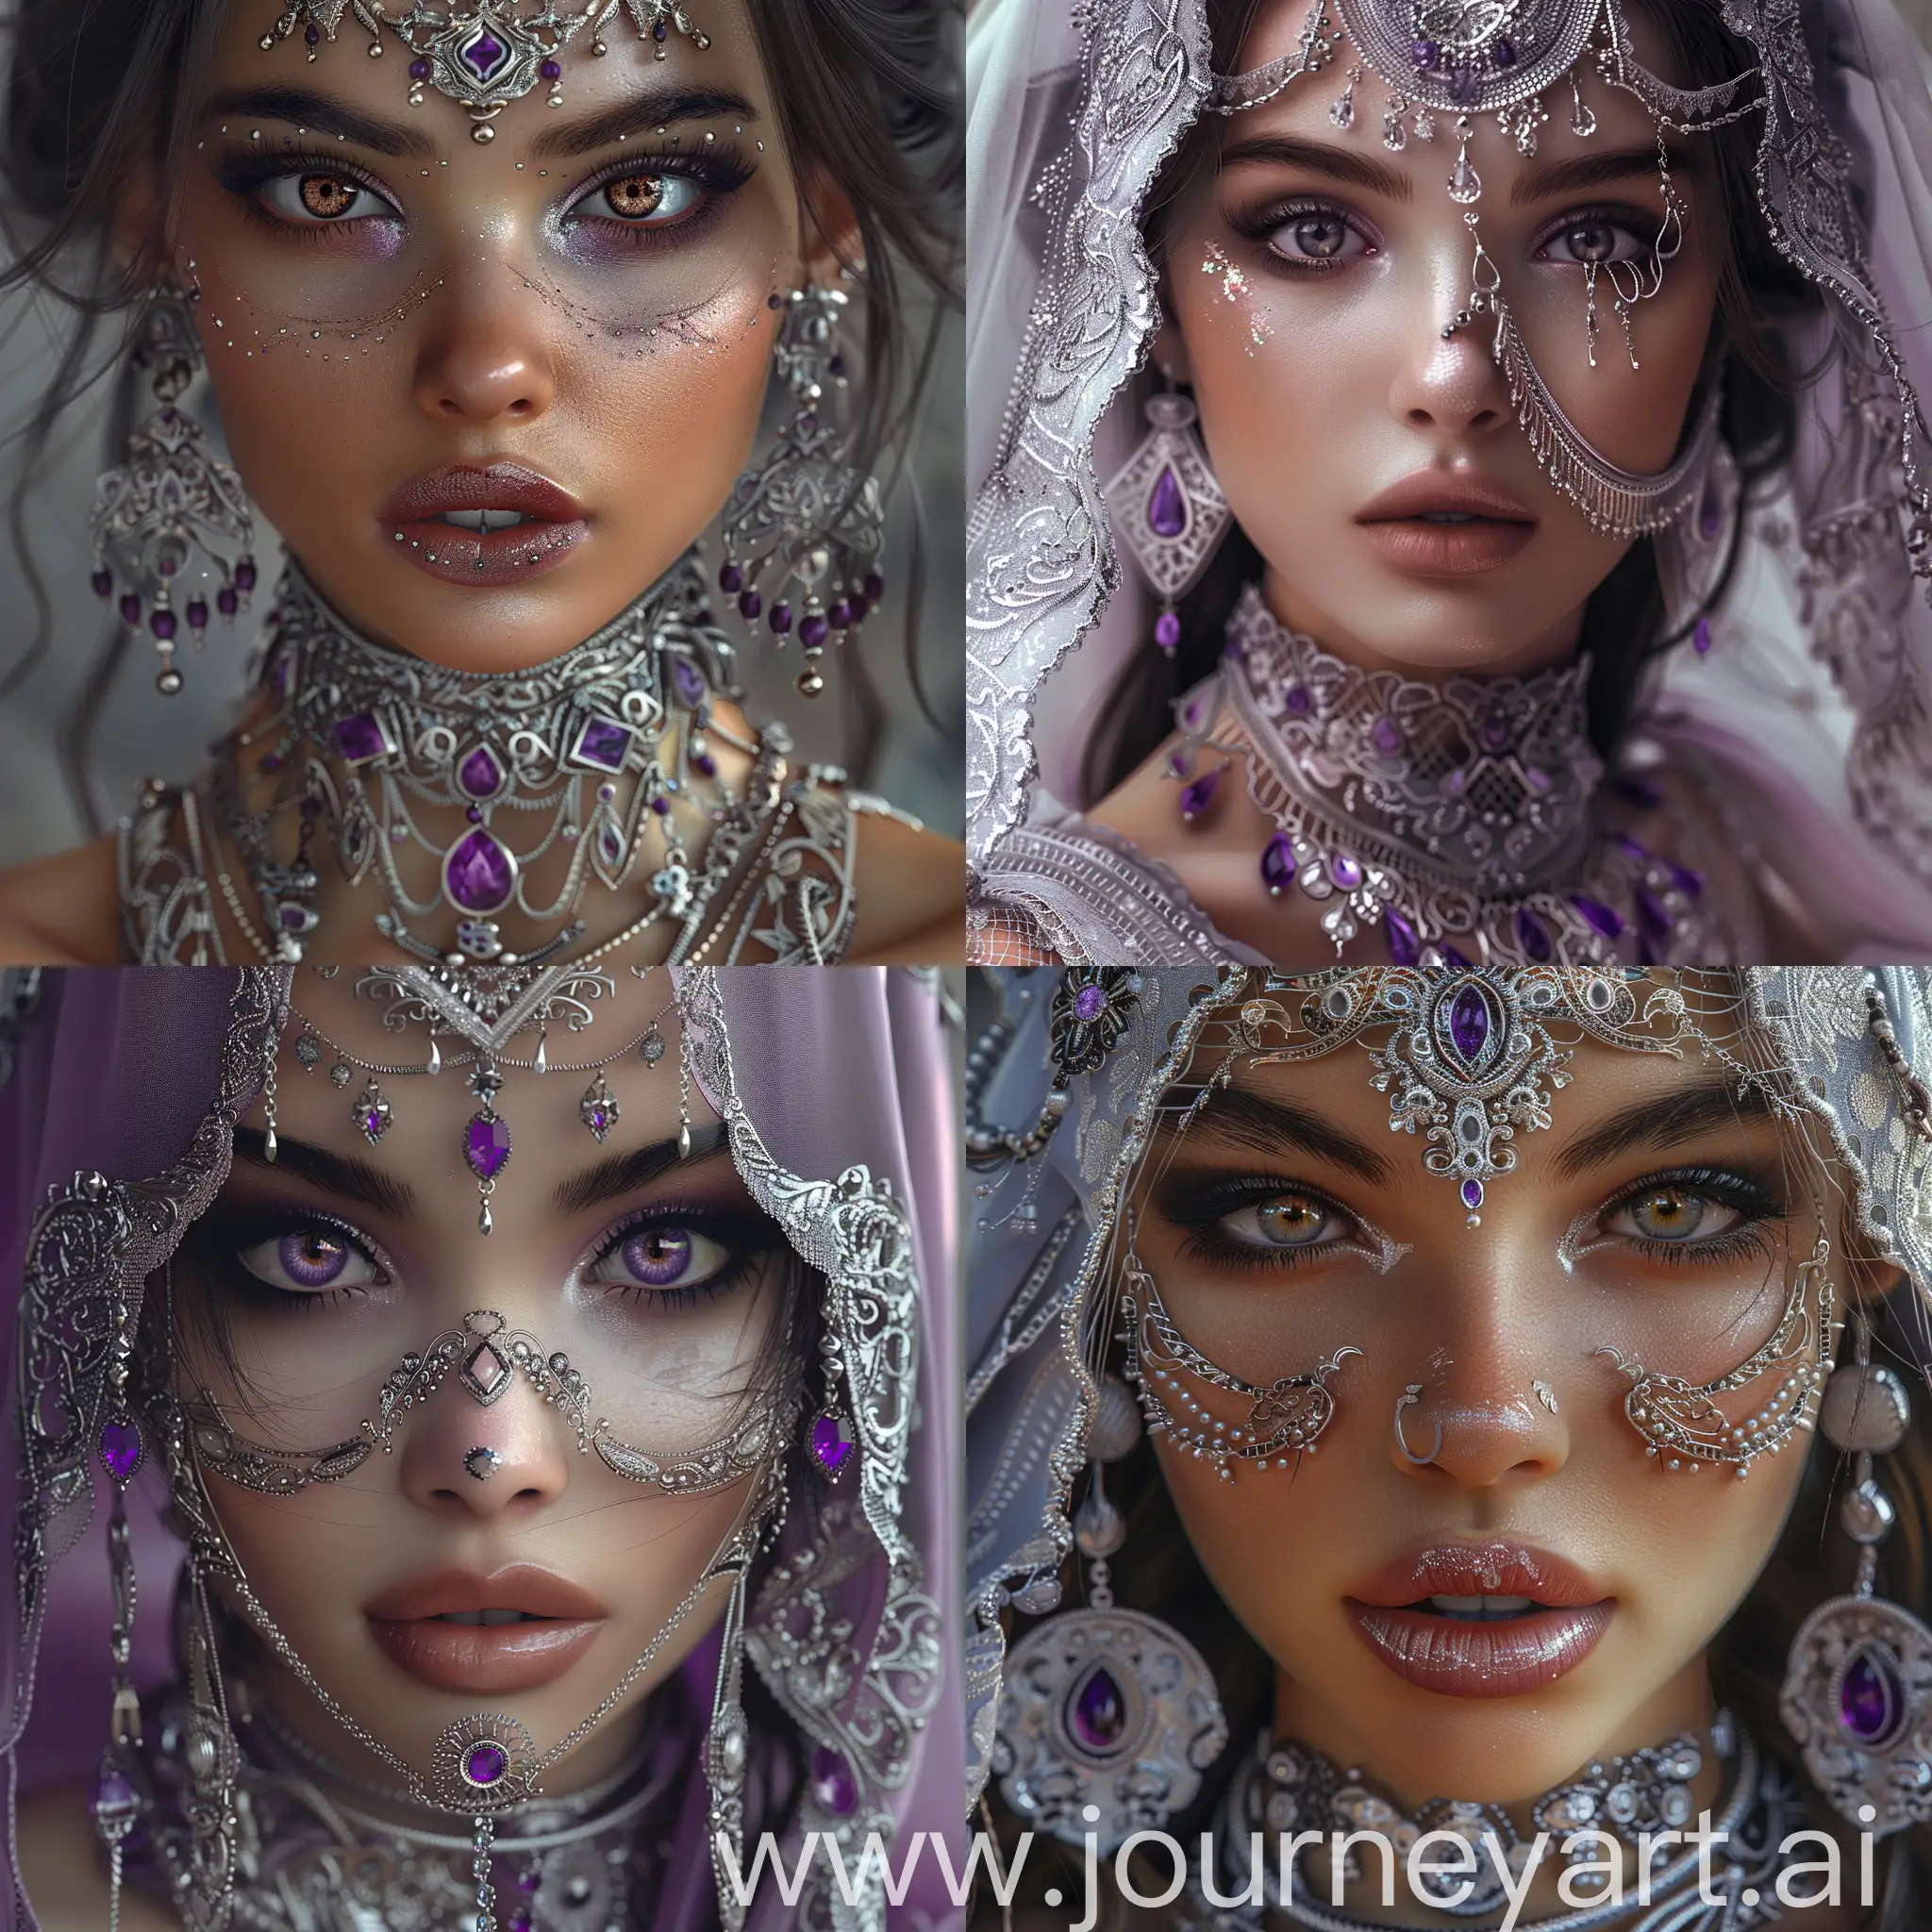 Hyperrealistic-Bohemian-Portrait-of-DarkEyed-Arabic-Beauty-with-Intricate-Silver-and-Amethyst-Jewelry